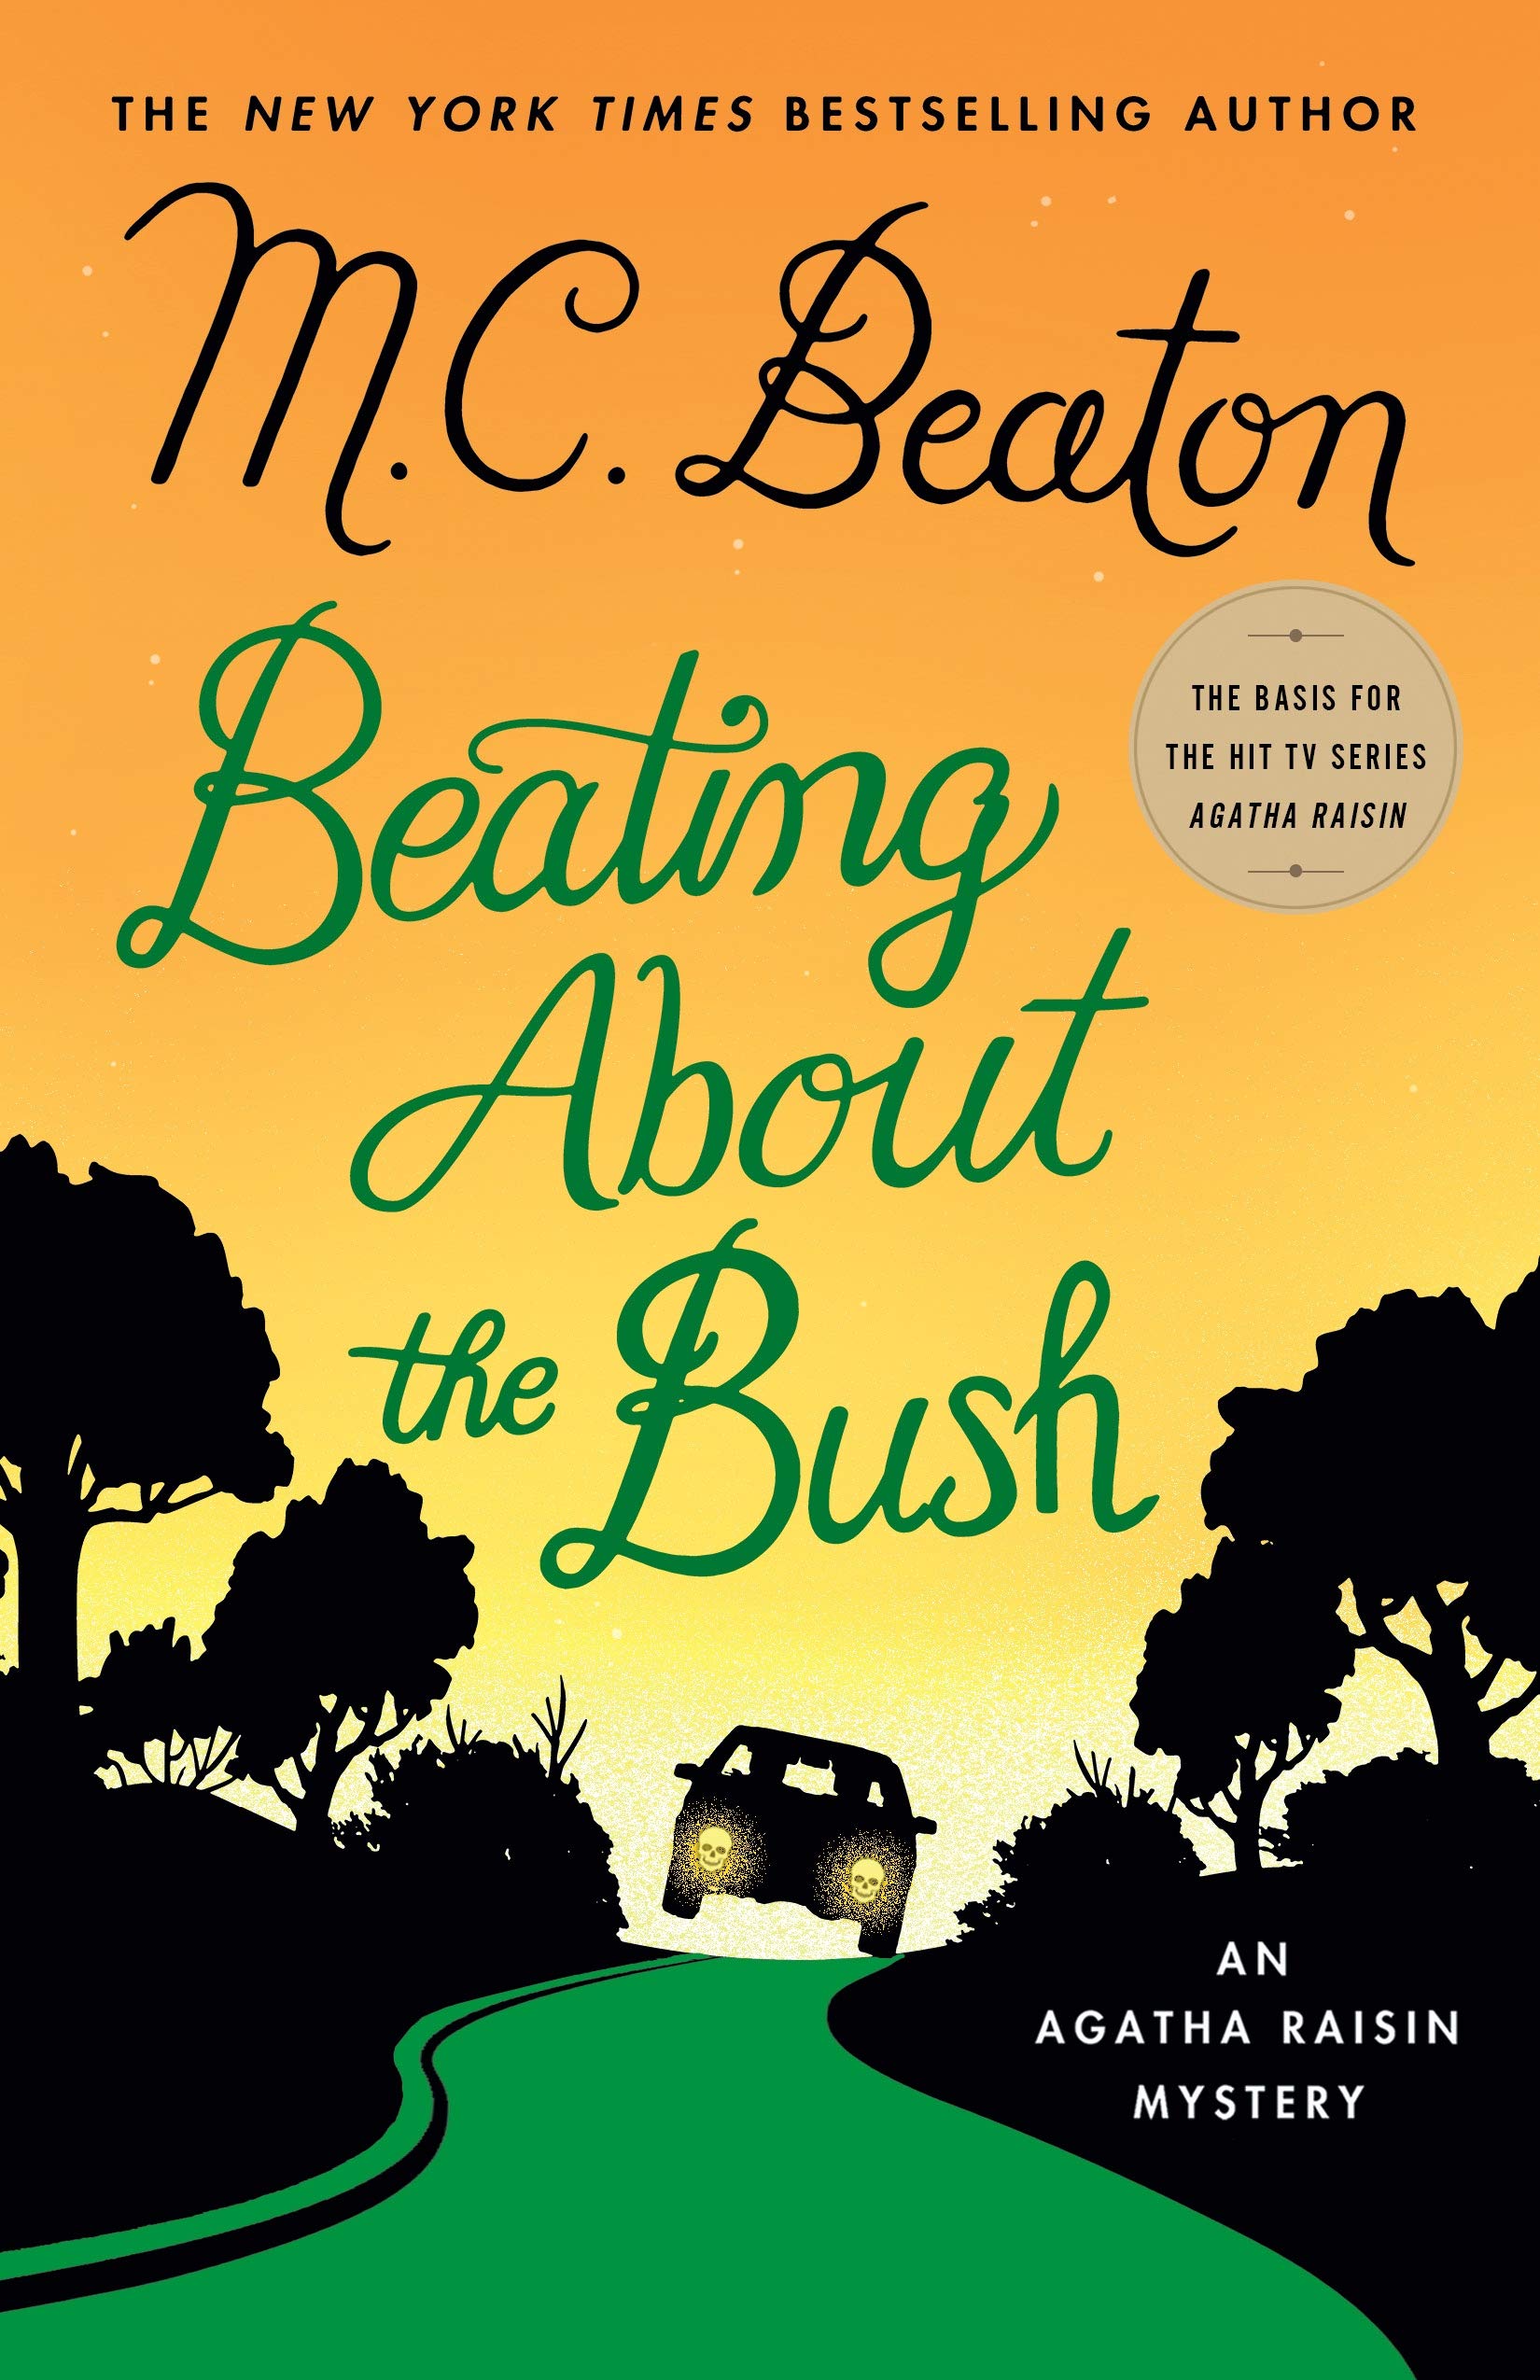 Image for "Beating About the Bush"